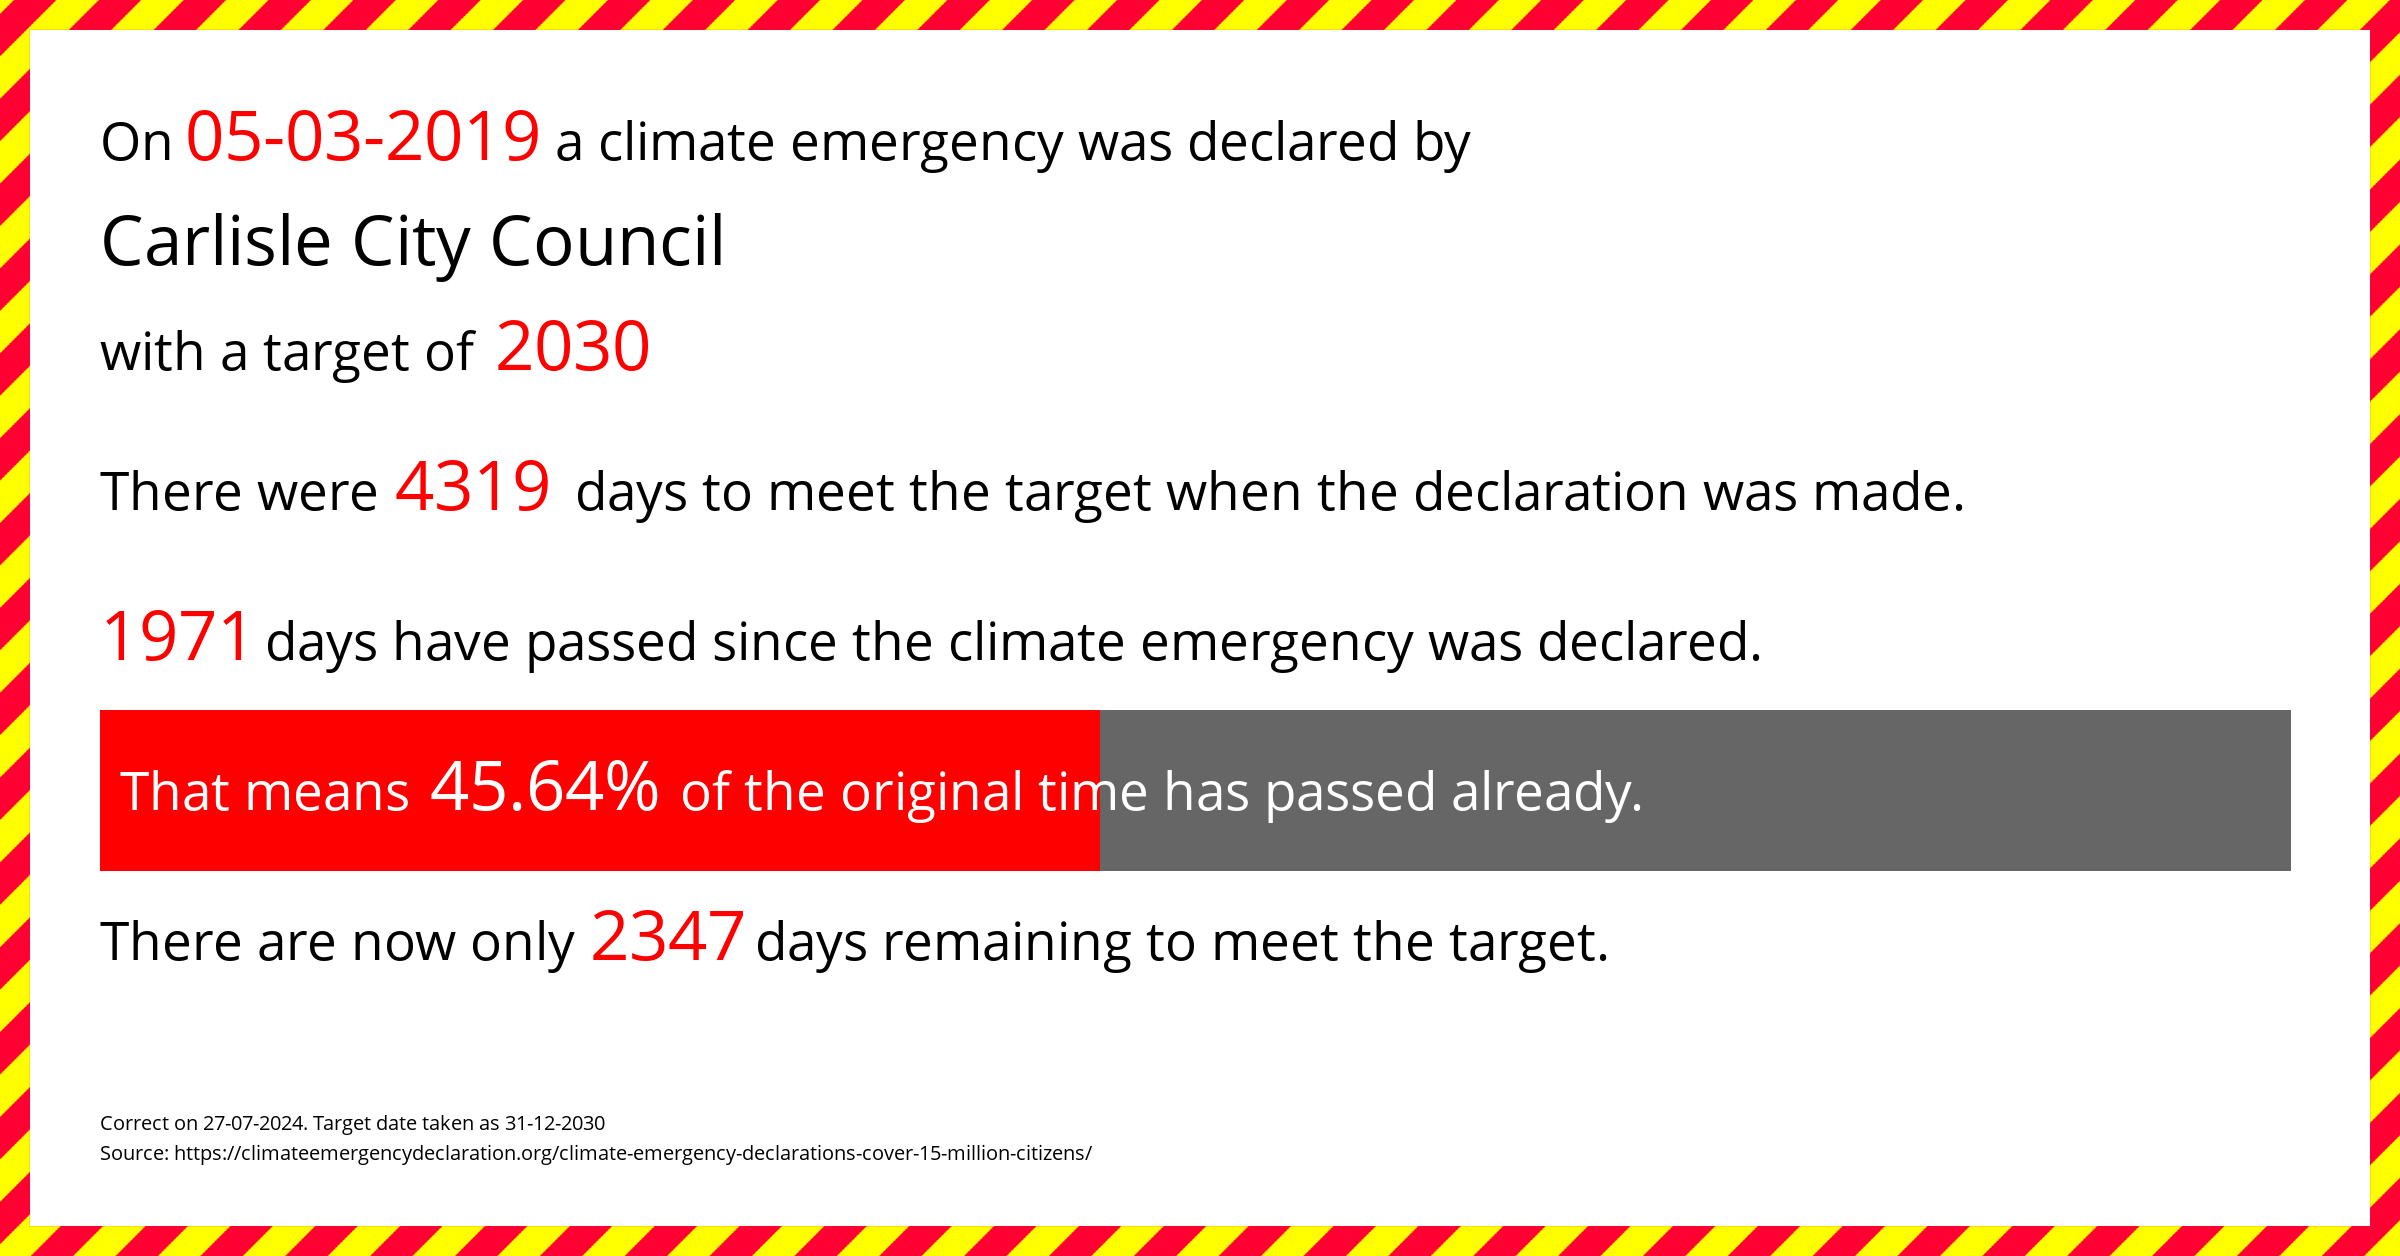 Carlisle City Council declared a Climate emergency on Tuesday 5th March 2019, with a target of 2030.